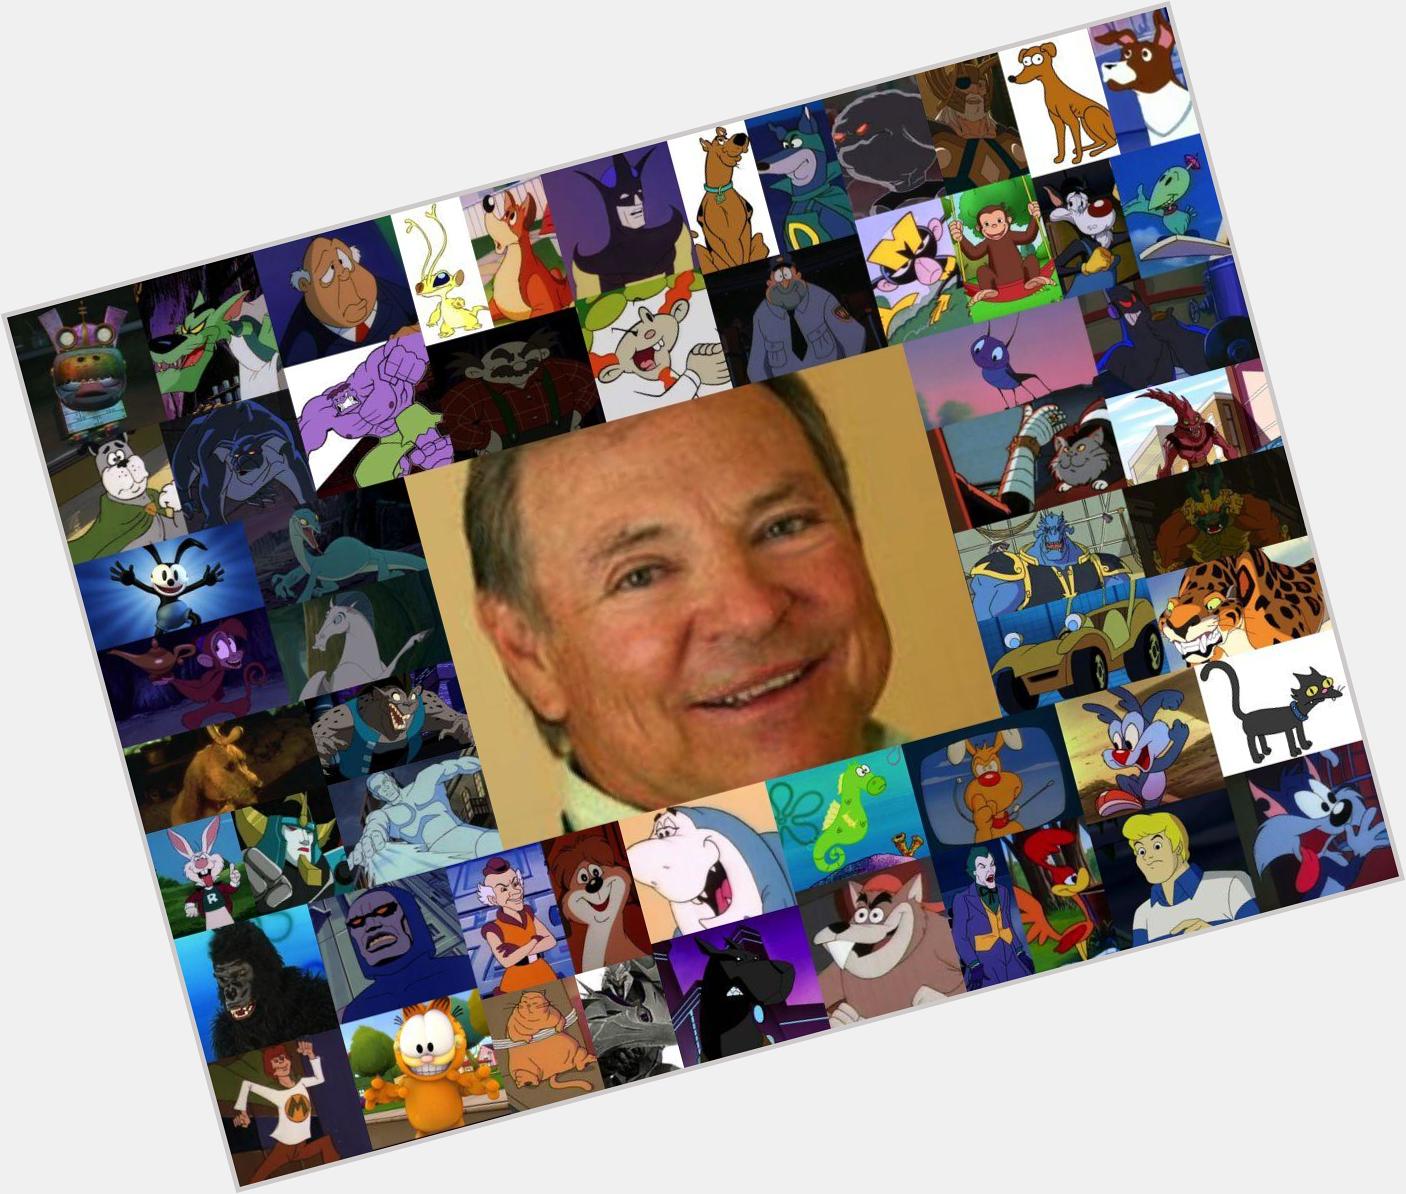 Happy Birthday to the man, the myth, the legend, Frank Welker!!

The voice of everyone\s childhoods. 